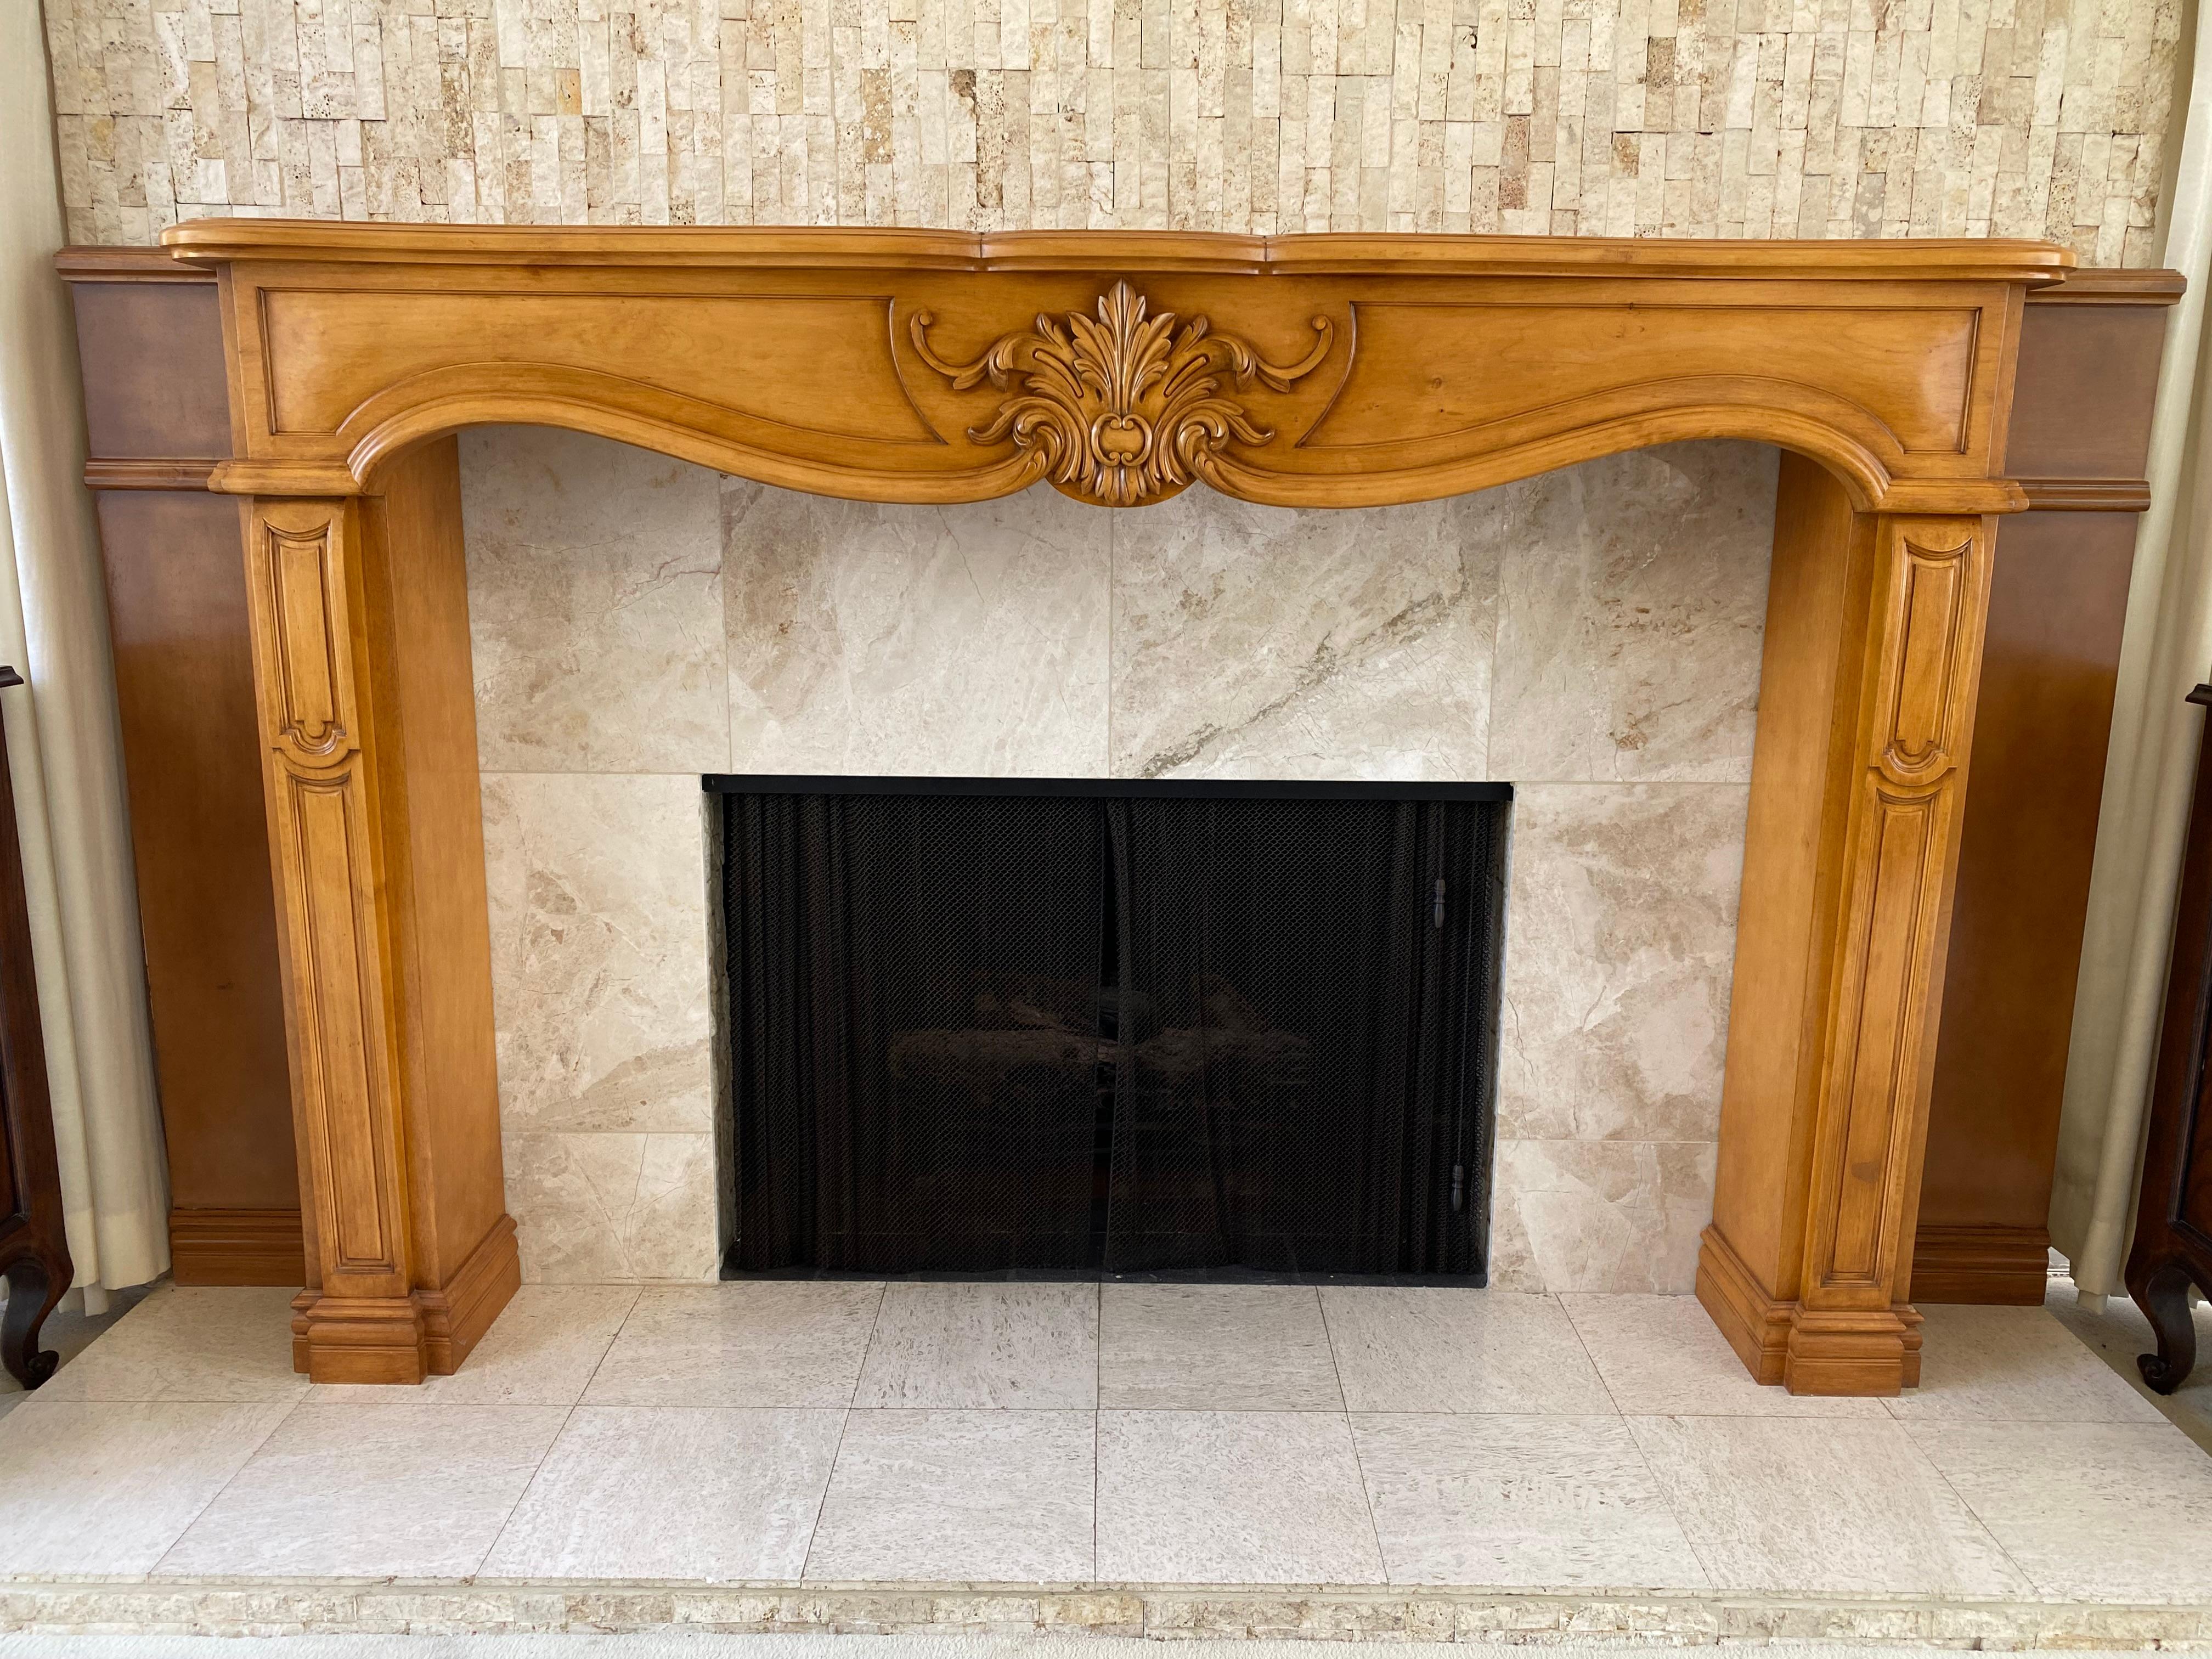 French Provincial style hand carved fireplace mantle in alder wood. Measures: Total width is 93